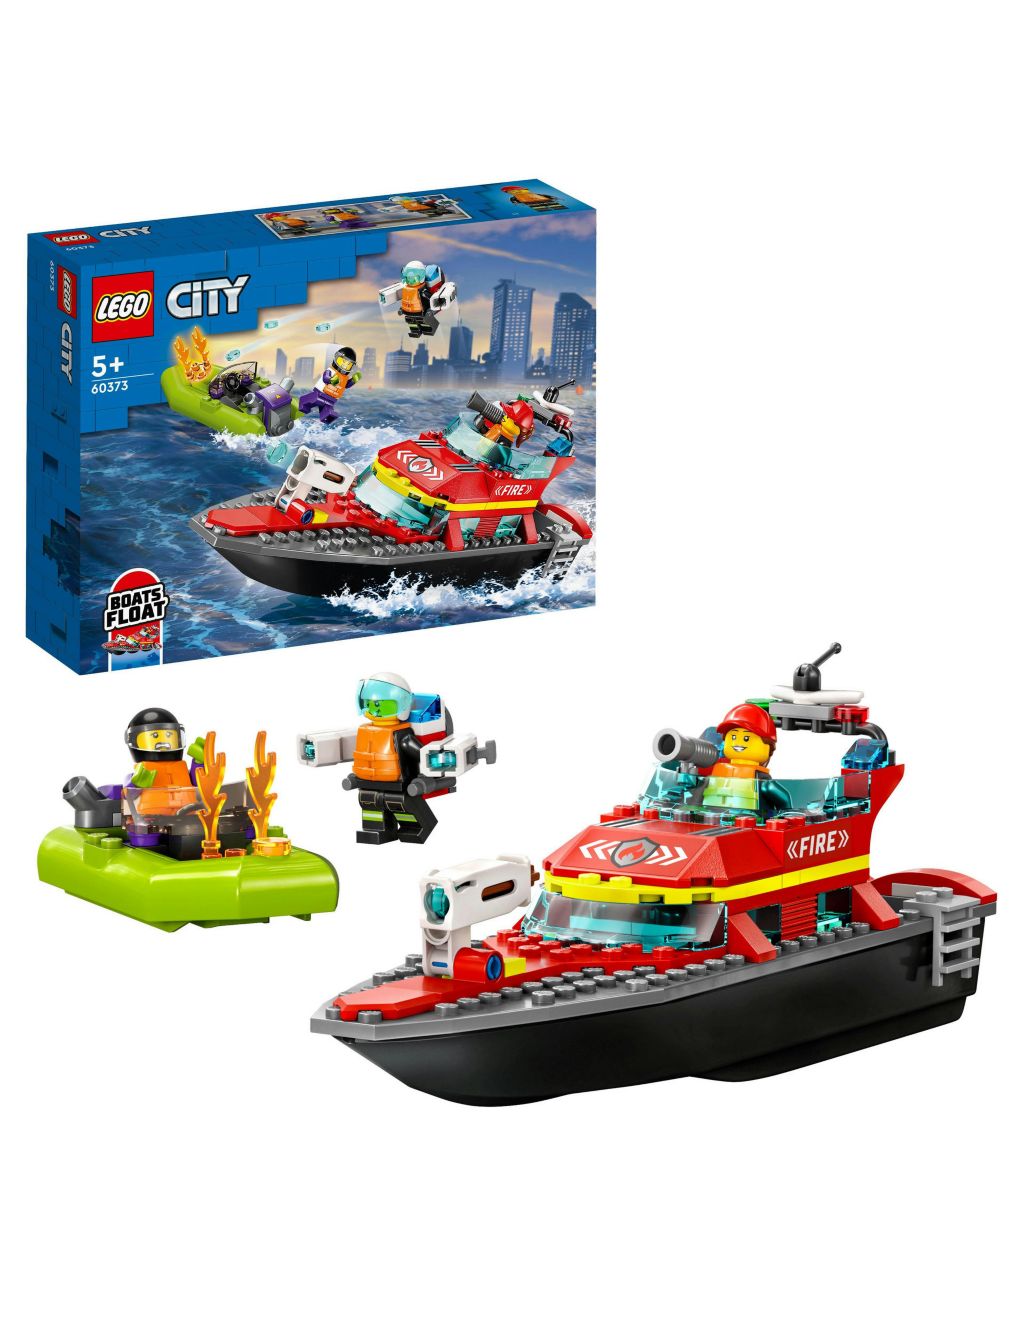 LEGO City Fire Rescue Boat Toy Building Set (5+ Yrs) image 1